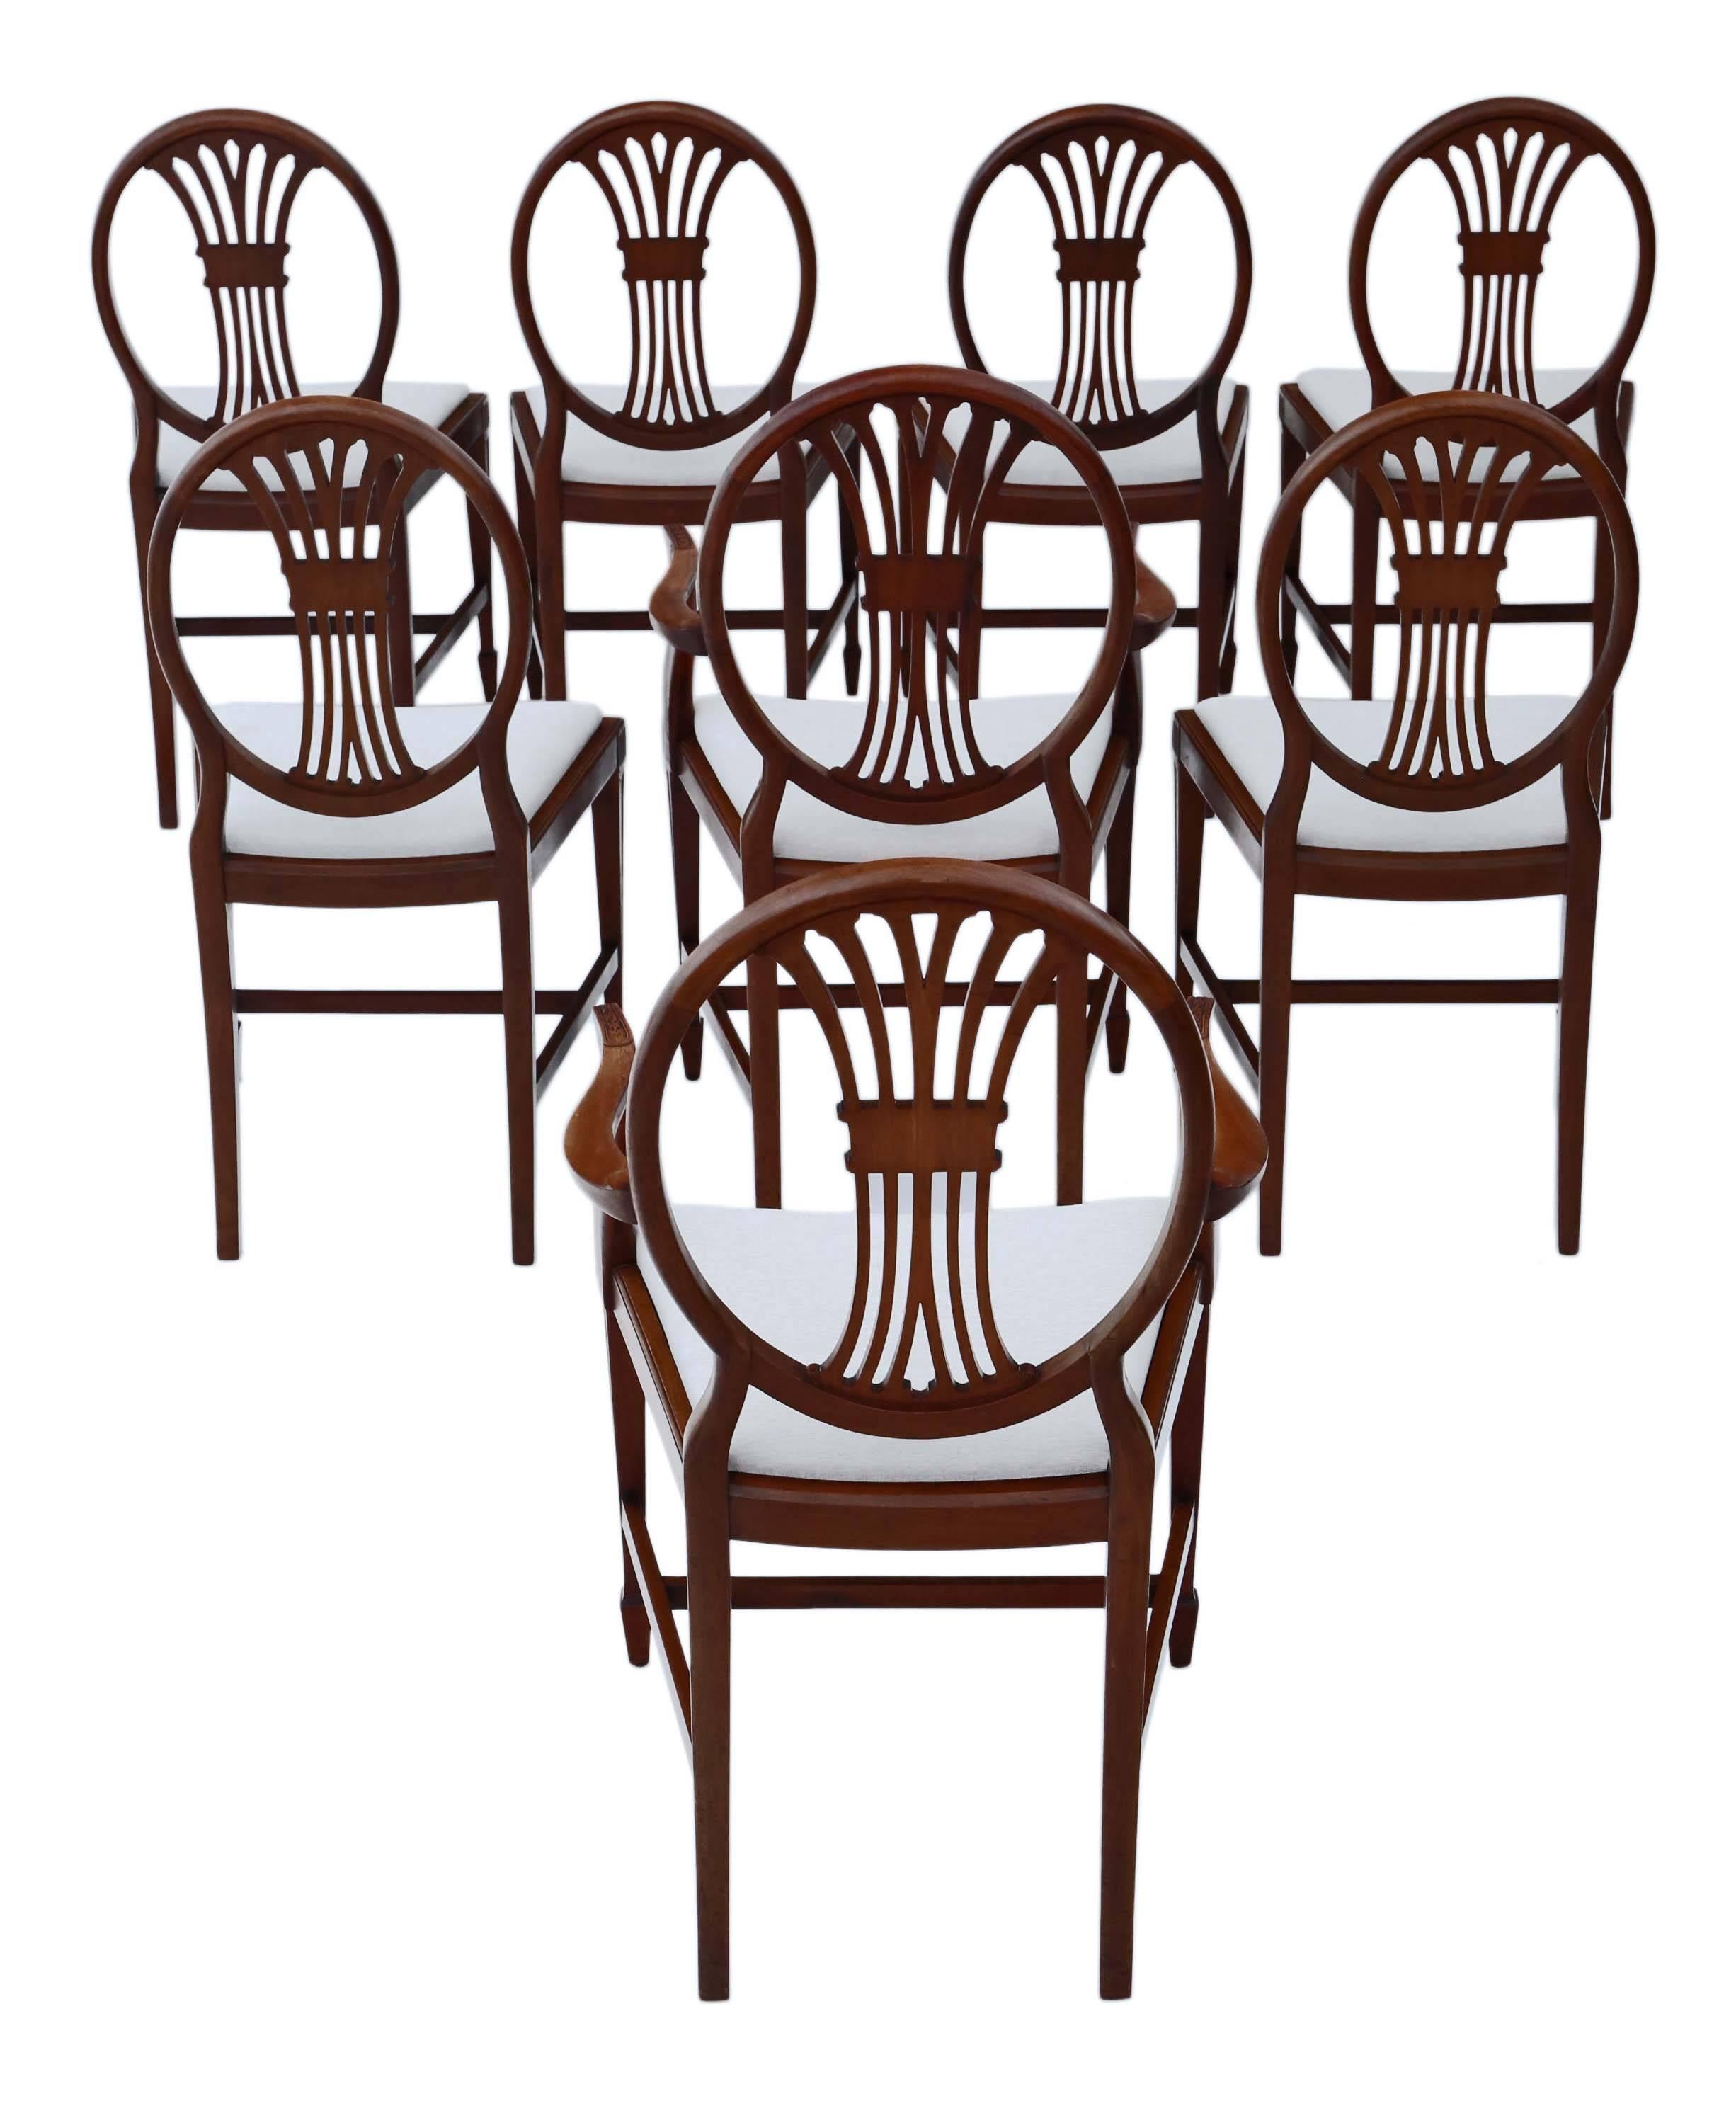 Antique fine quality set of eight (6+2) Georgian revival mahogany dining chairs. Far better than most. Originally from Harrods, with some chairs bearing their plaque.

Date from circa 1910.

Solid and strong with no loose joints. No woodworm.